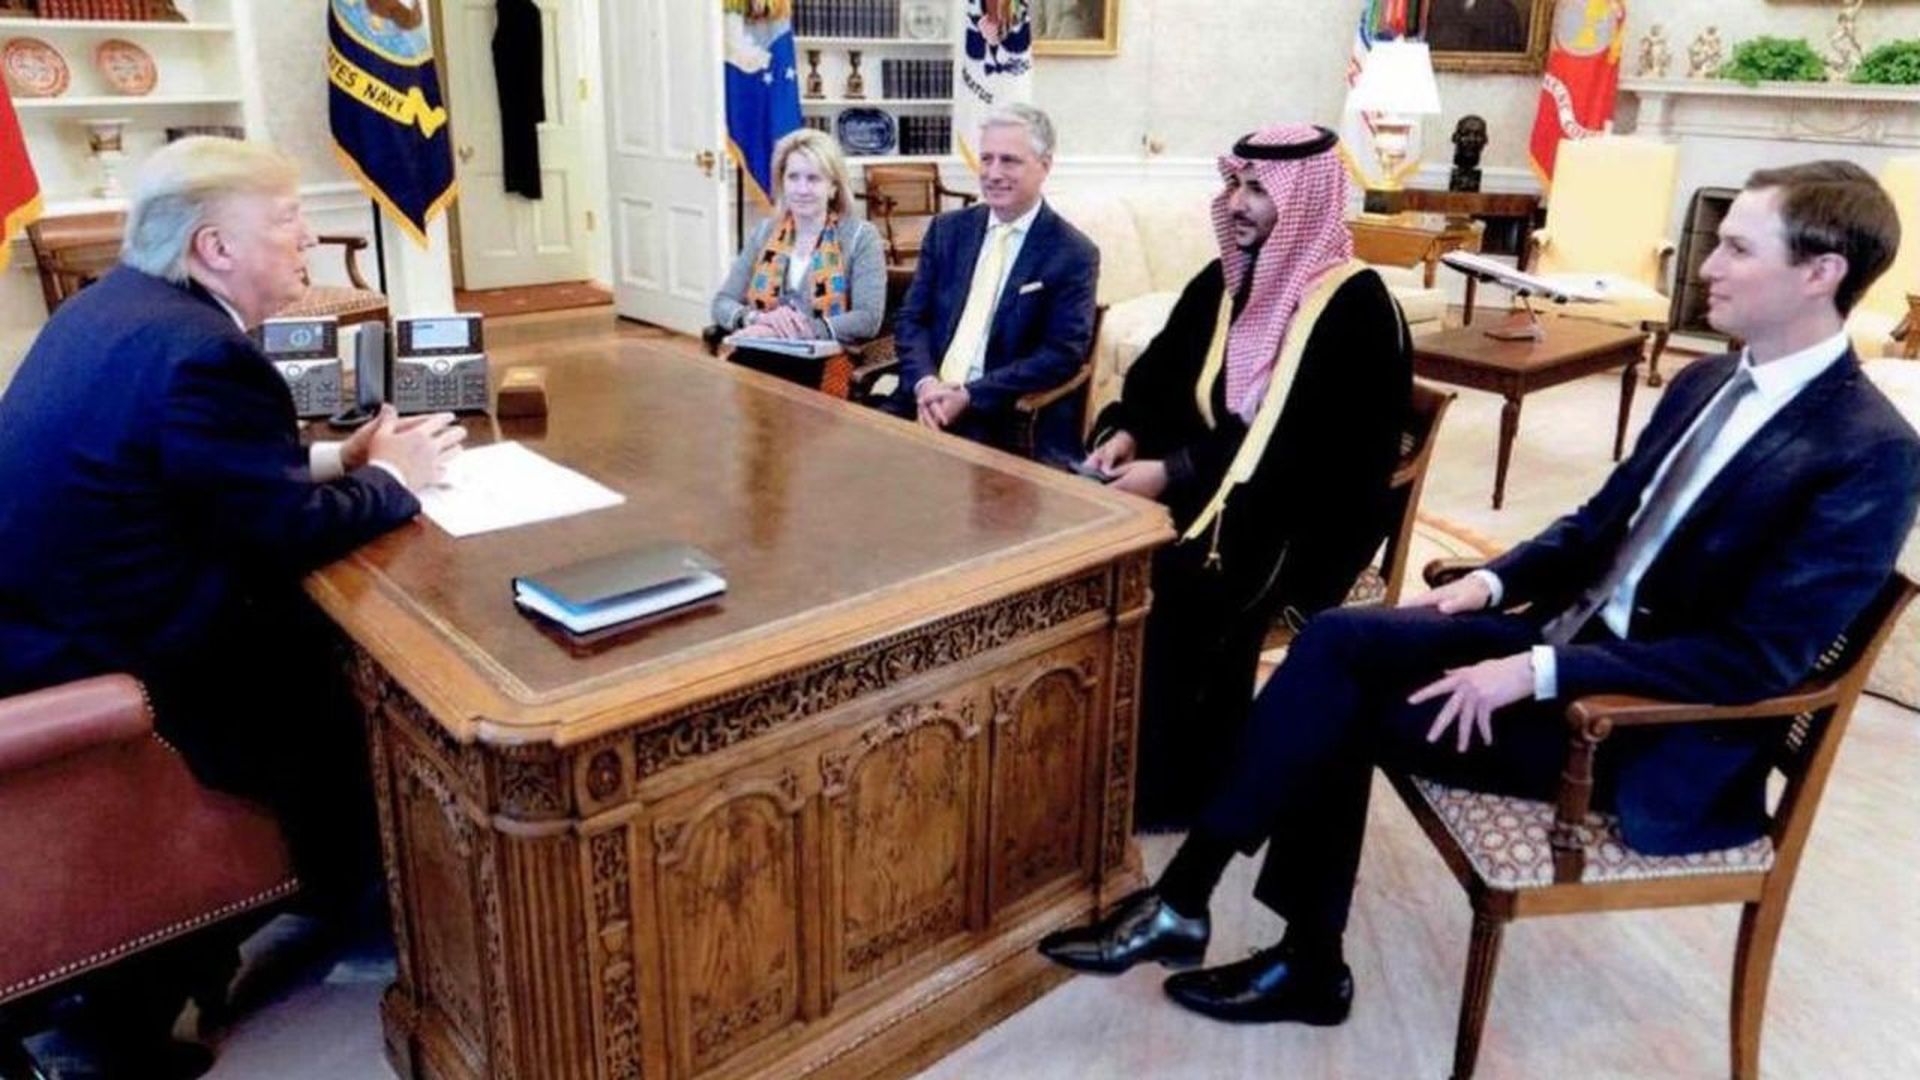 It is disturbing to see the government of Saudi Arabia have more transparency than the White House